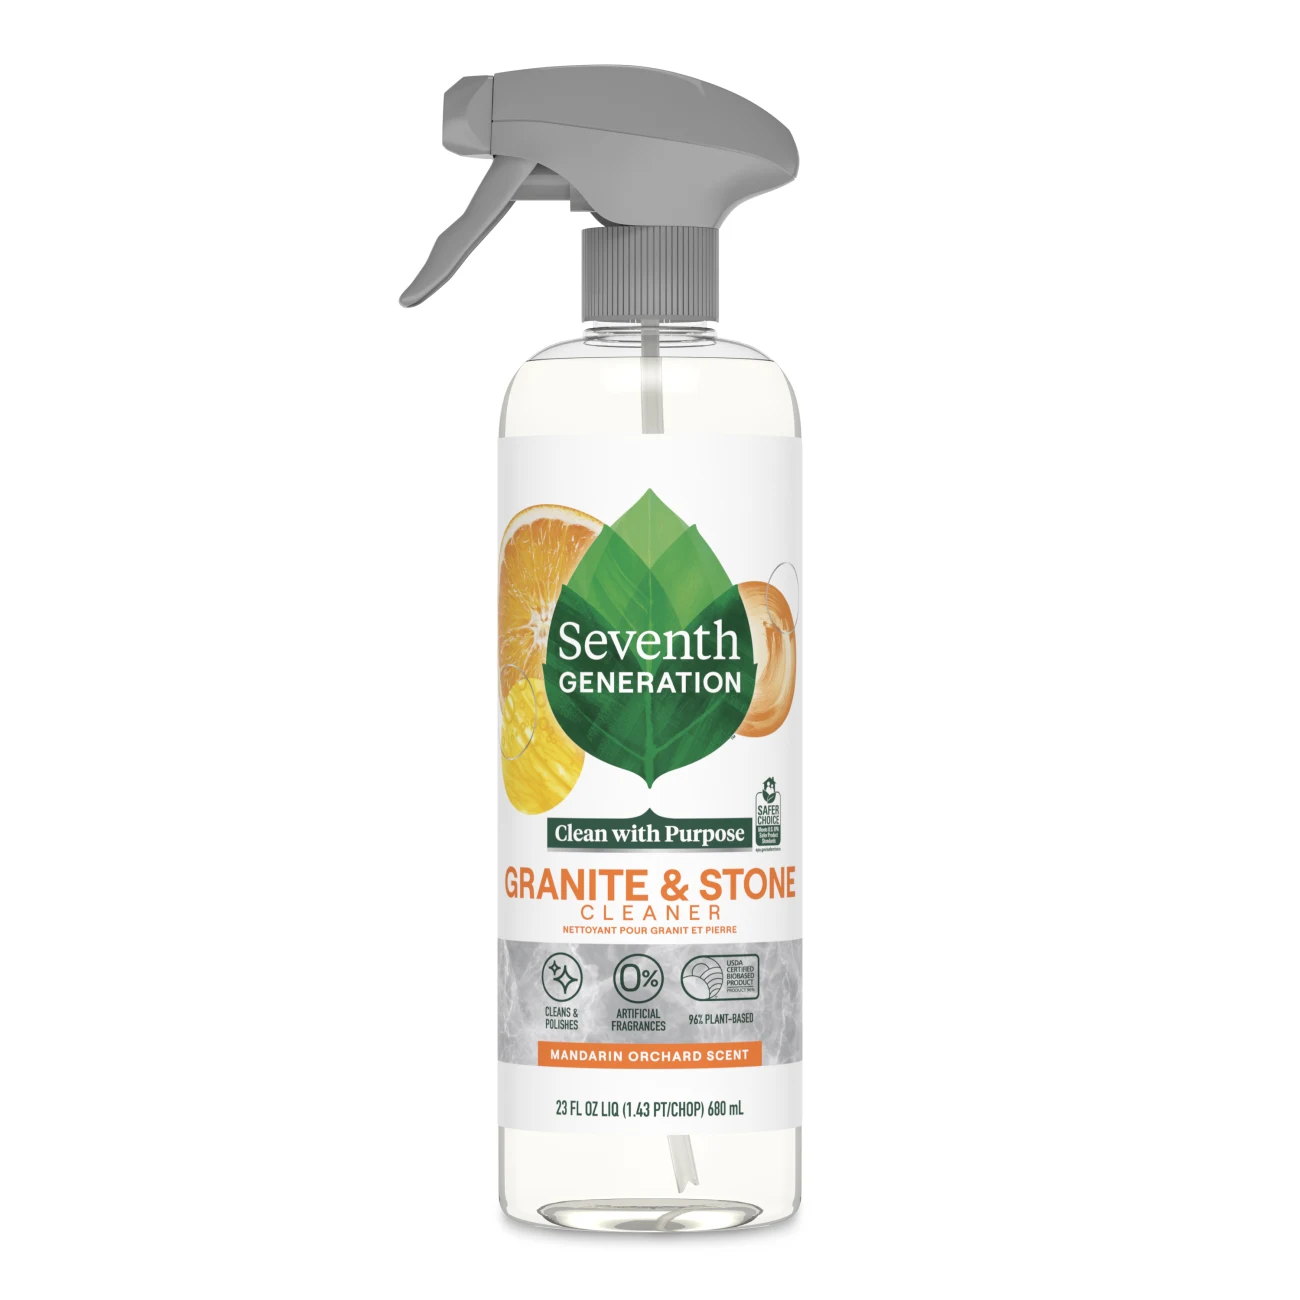 7th Generation Granite & Stone Cleaner is made from nontoxic ingredients.